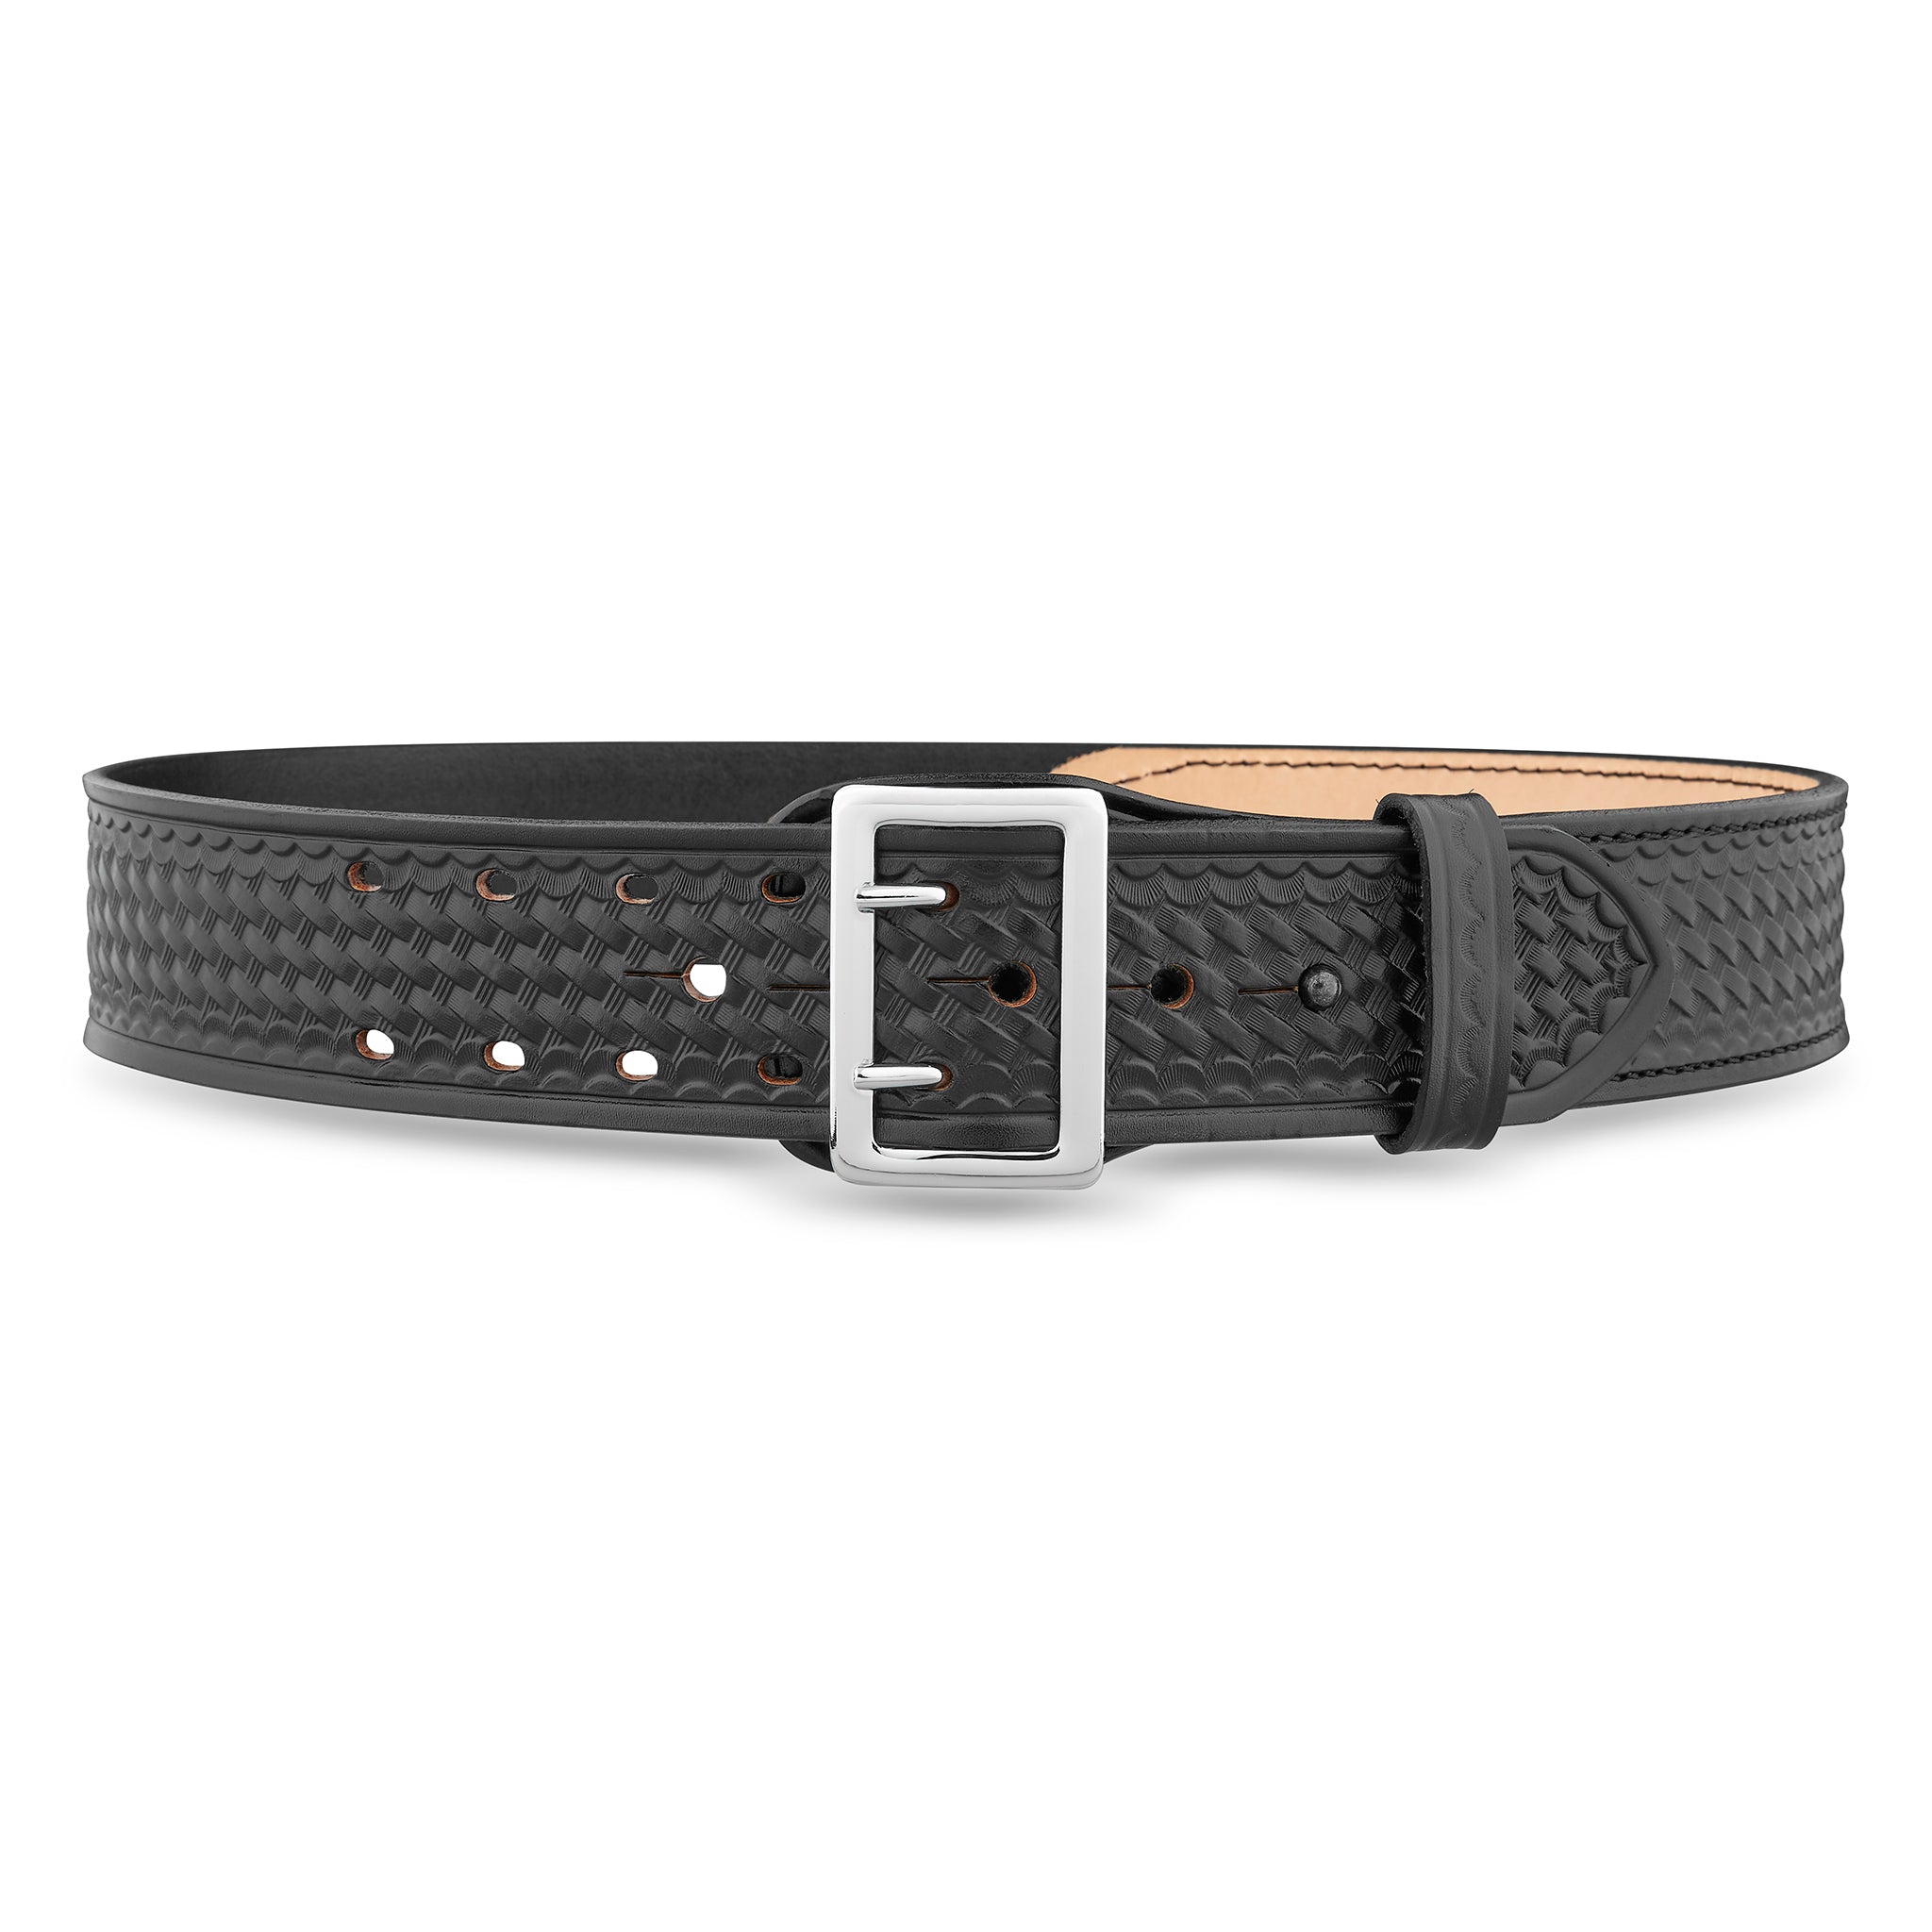 Buy Leather Duty Belt with 2 Prong Buckle - Niton999